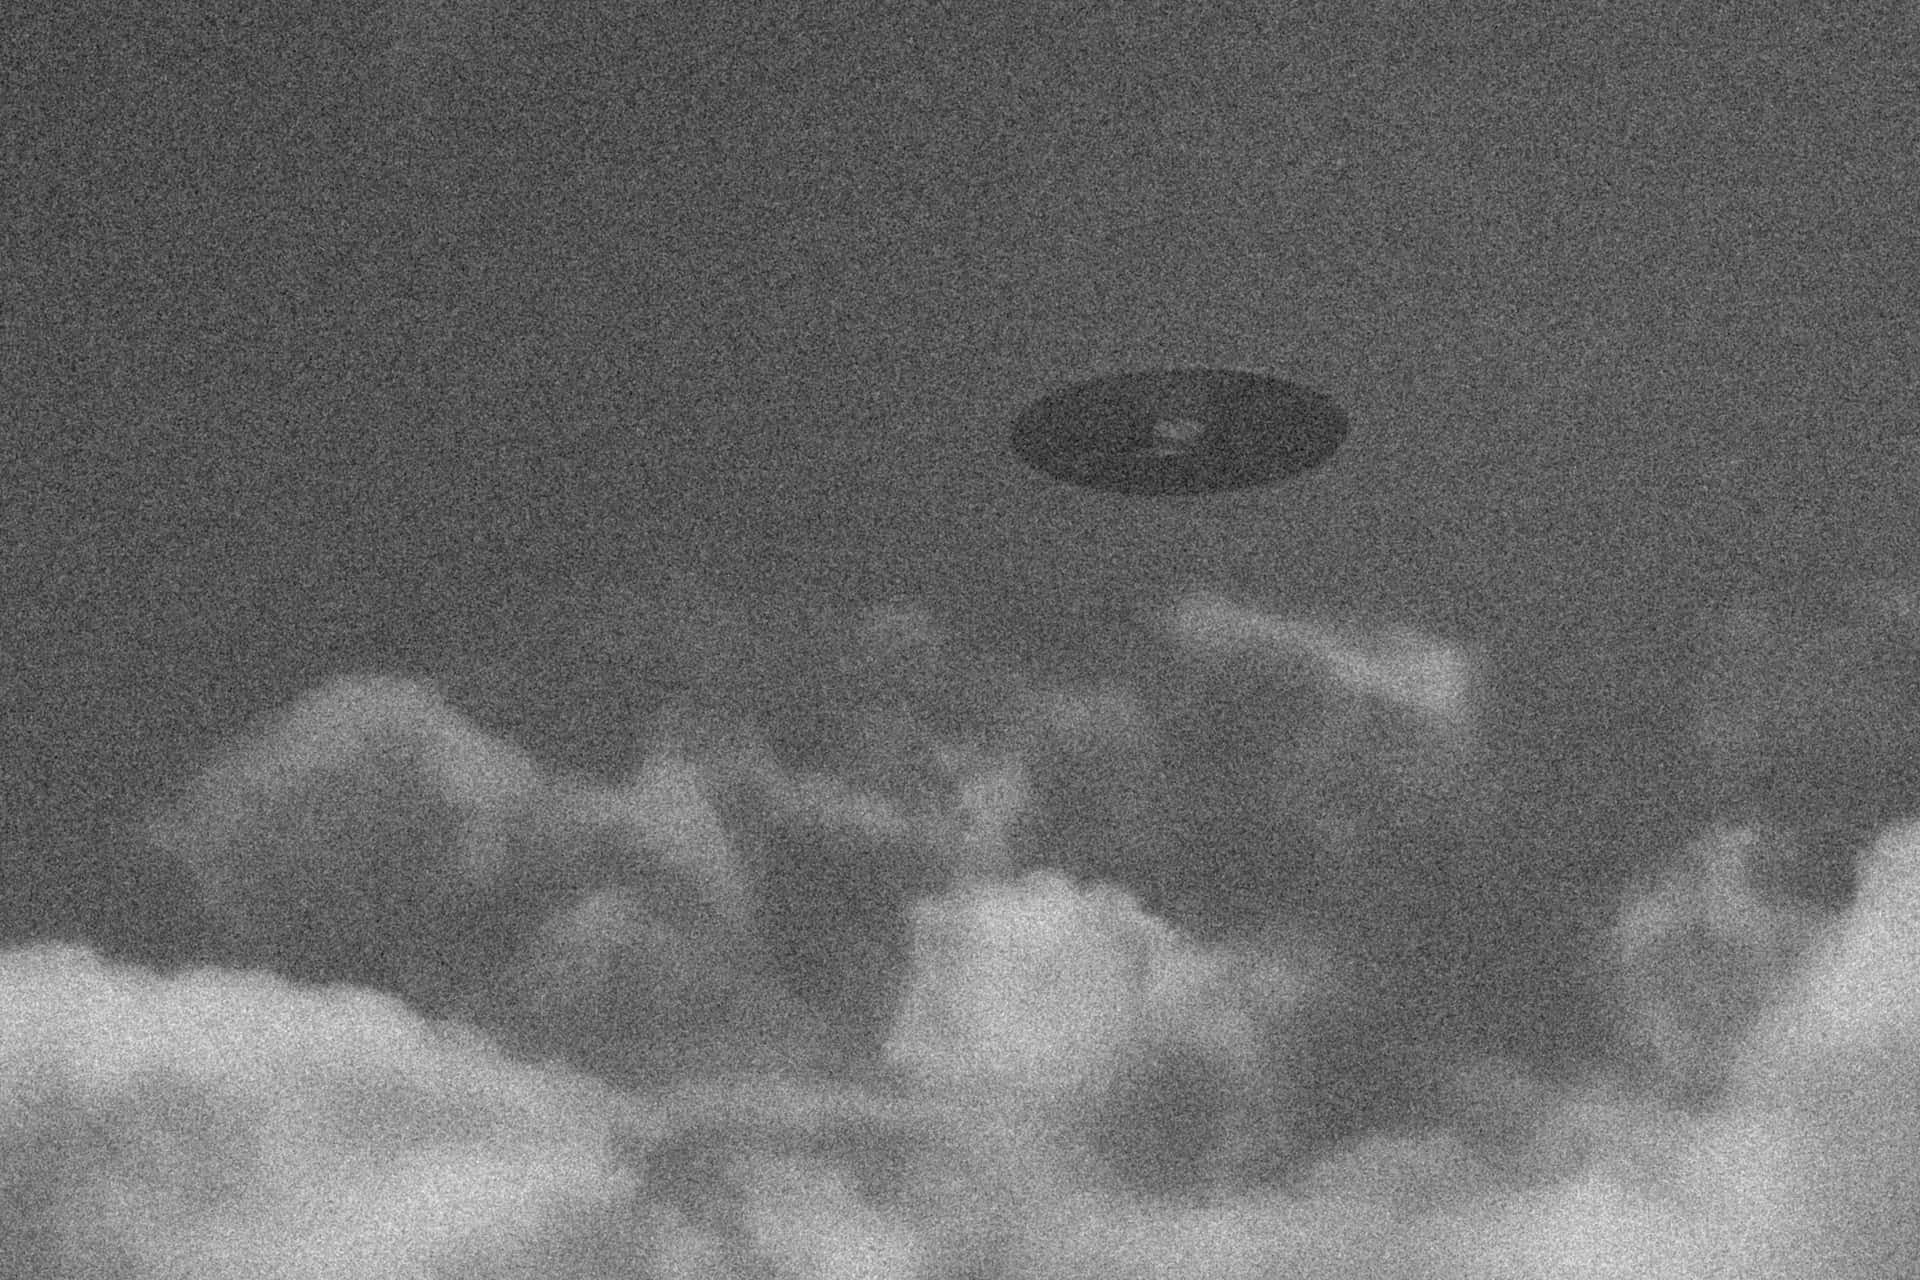 Download Mysterious Unidentified Flying Object | Wallpapers.com